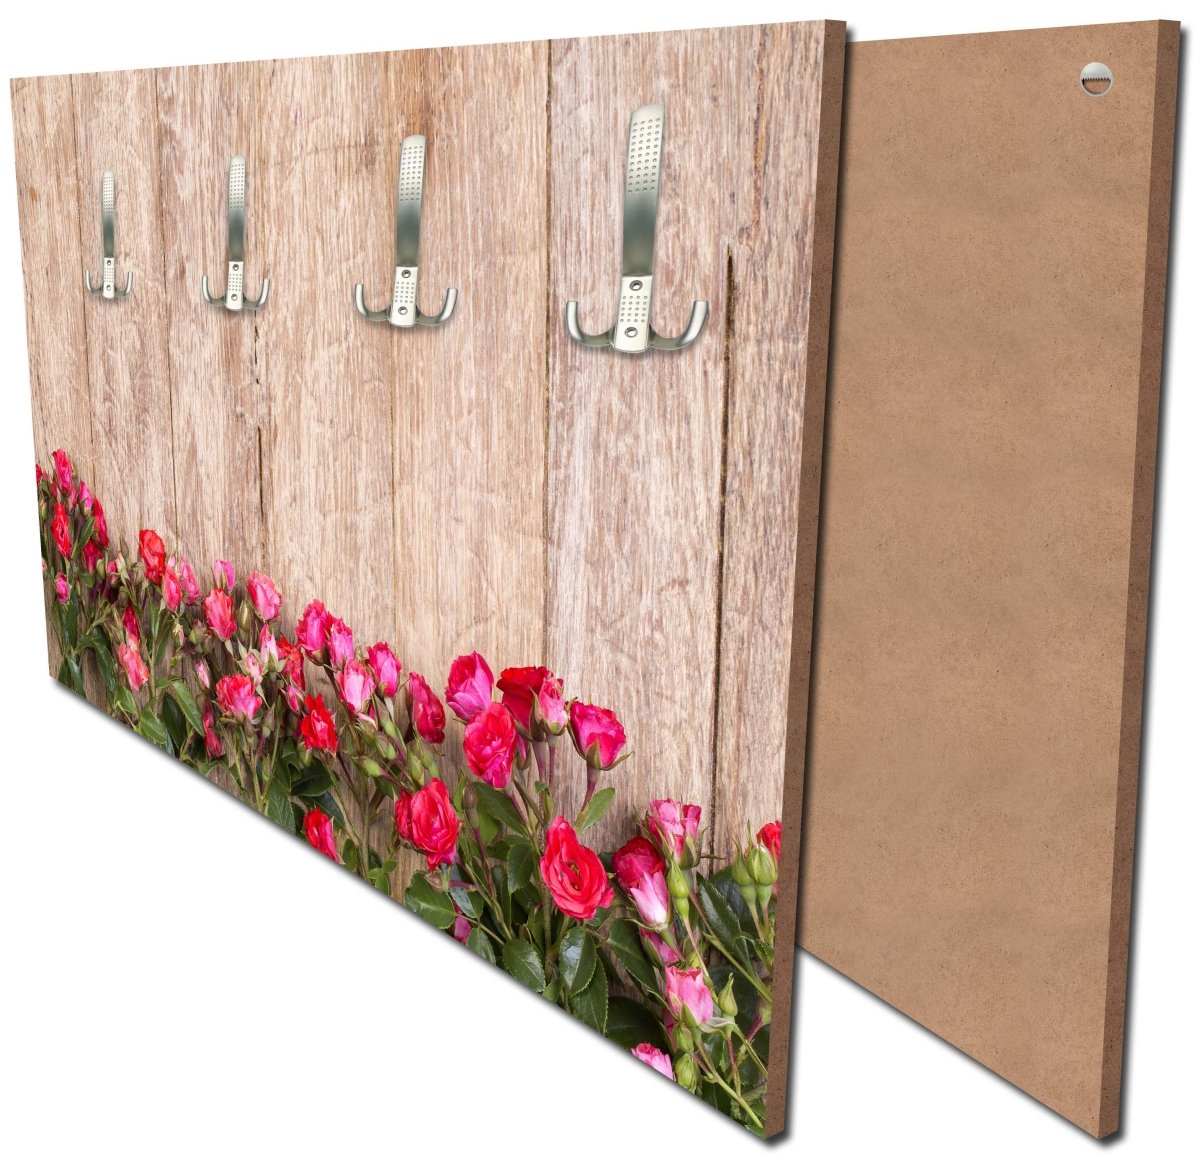 Wardrobe Red roses on wooden board M1025